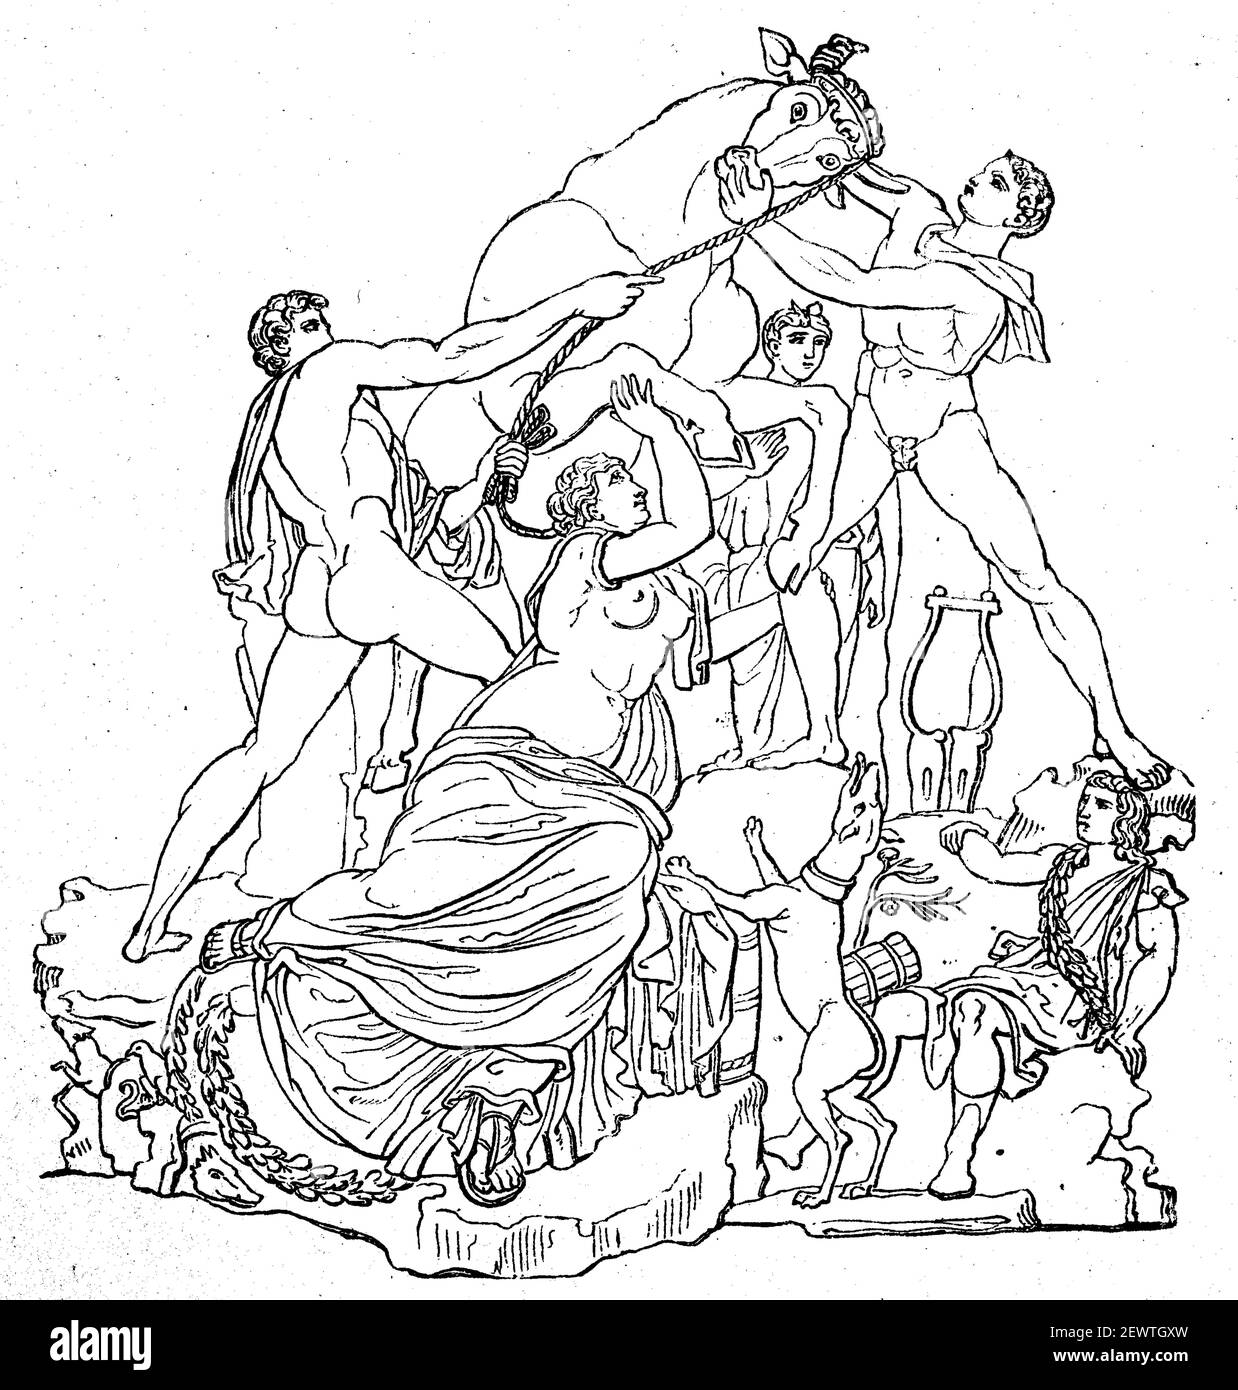 Group of the Farnese Bull, artwork from the Farnese Palace in Rome, one of the largest marble groups of antiquity, illustration from 1890  /  Gruppe des Farnesischer Stier, Kunstwerk aus dem Palast Farnese in Rom, eine der größten Marmorgruppen des Altertum, Illustration aus 1890, Historisch, historical, digital improved reproduction of an original from the 19th century / digitale Reproduktion einer Originalvorlage aus dem 19. Jahrhundert, Stock Photo